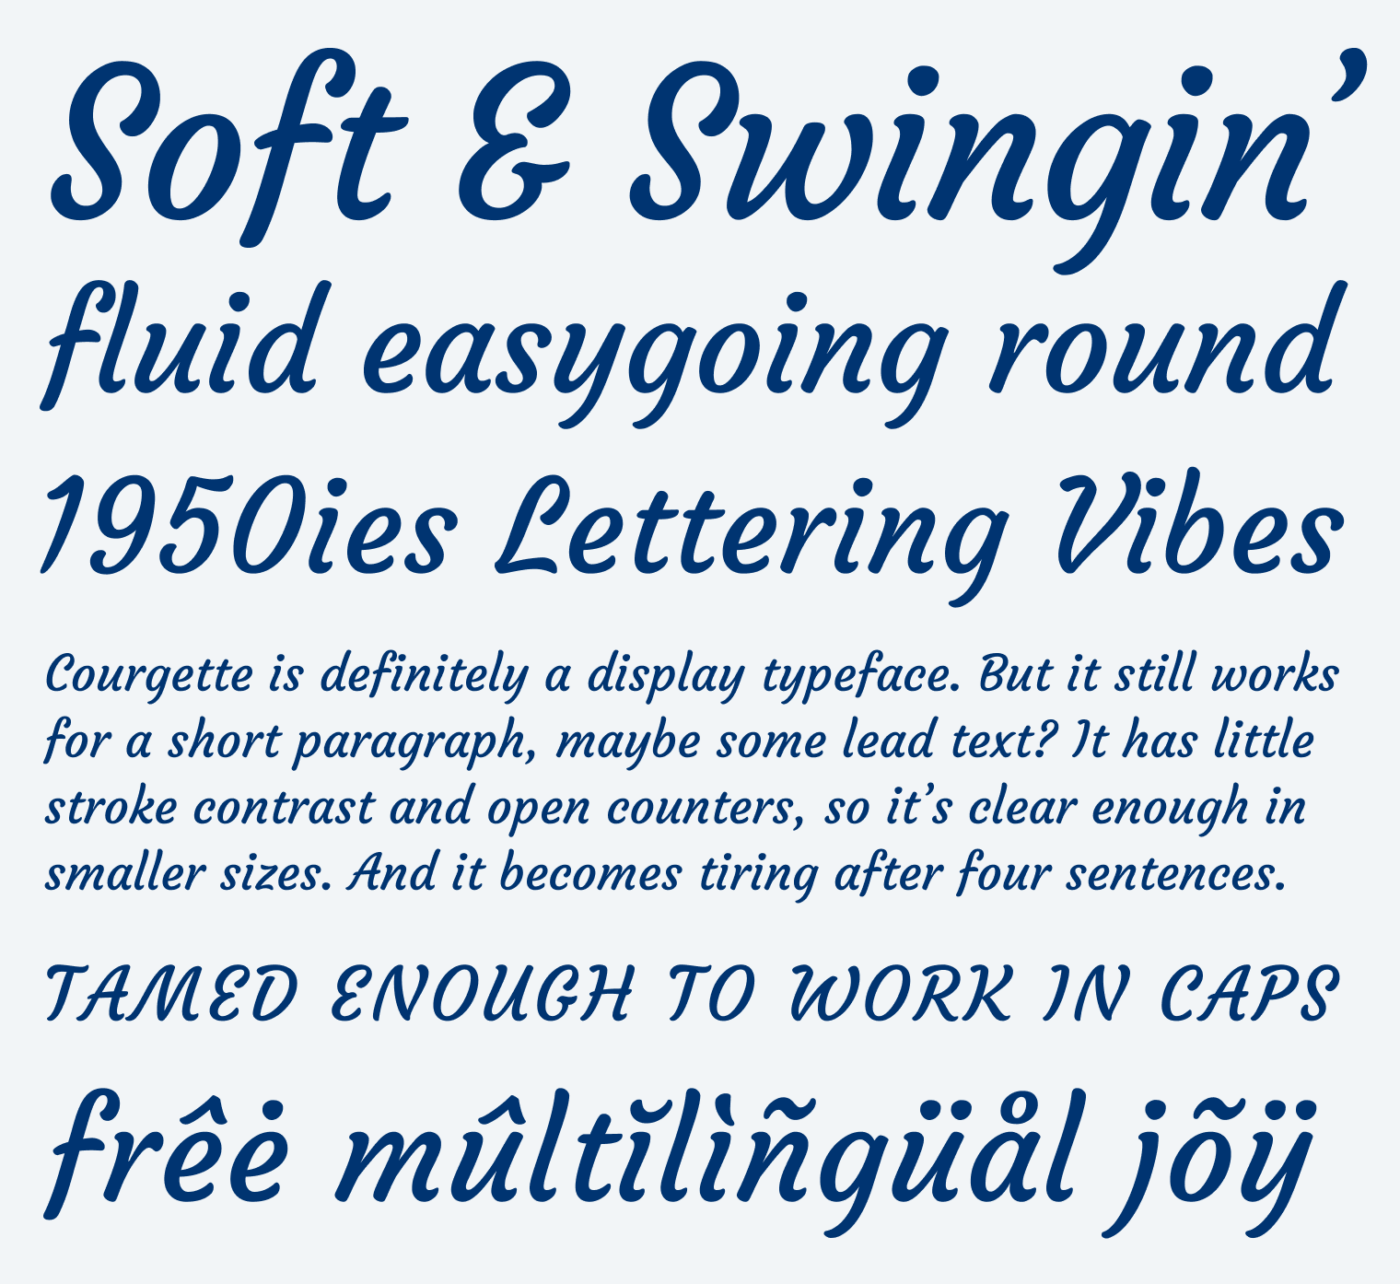 Soft & Swingin’, fluid easygoing round, 
1950ies Lettering Vibes. Courgette is definitely a display typeface. But it still works for a short paragraph, maybe some lead text? It has little stroke contrast and open counters, so it’s clear enough in smaller sizes. And it becomes tiring after four sentences. Tamed enough to work in caps. free multilingual joy.